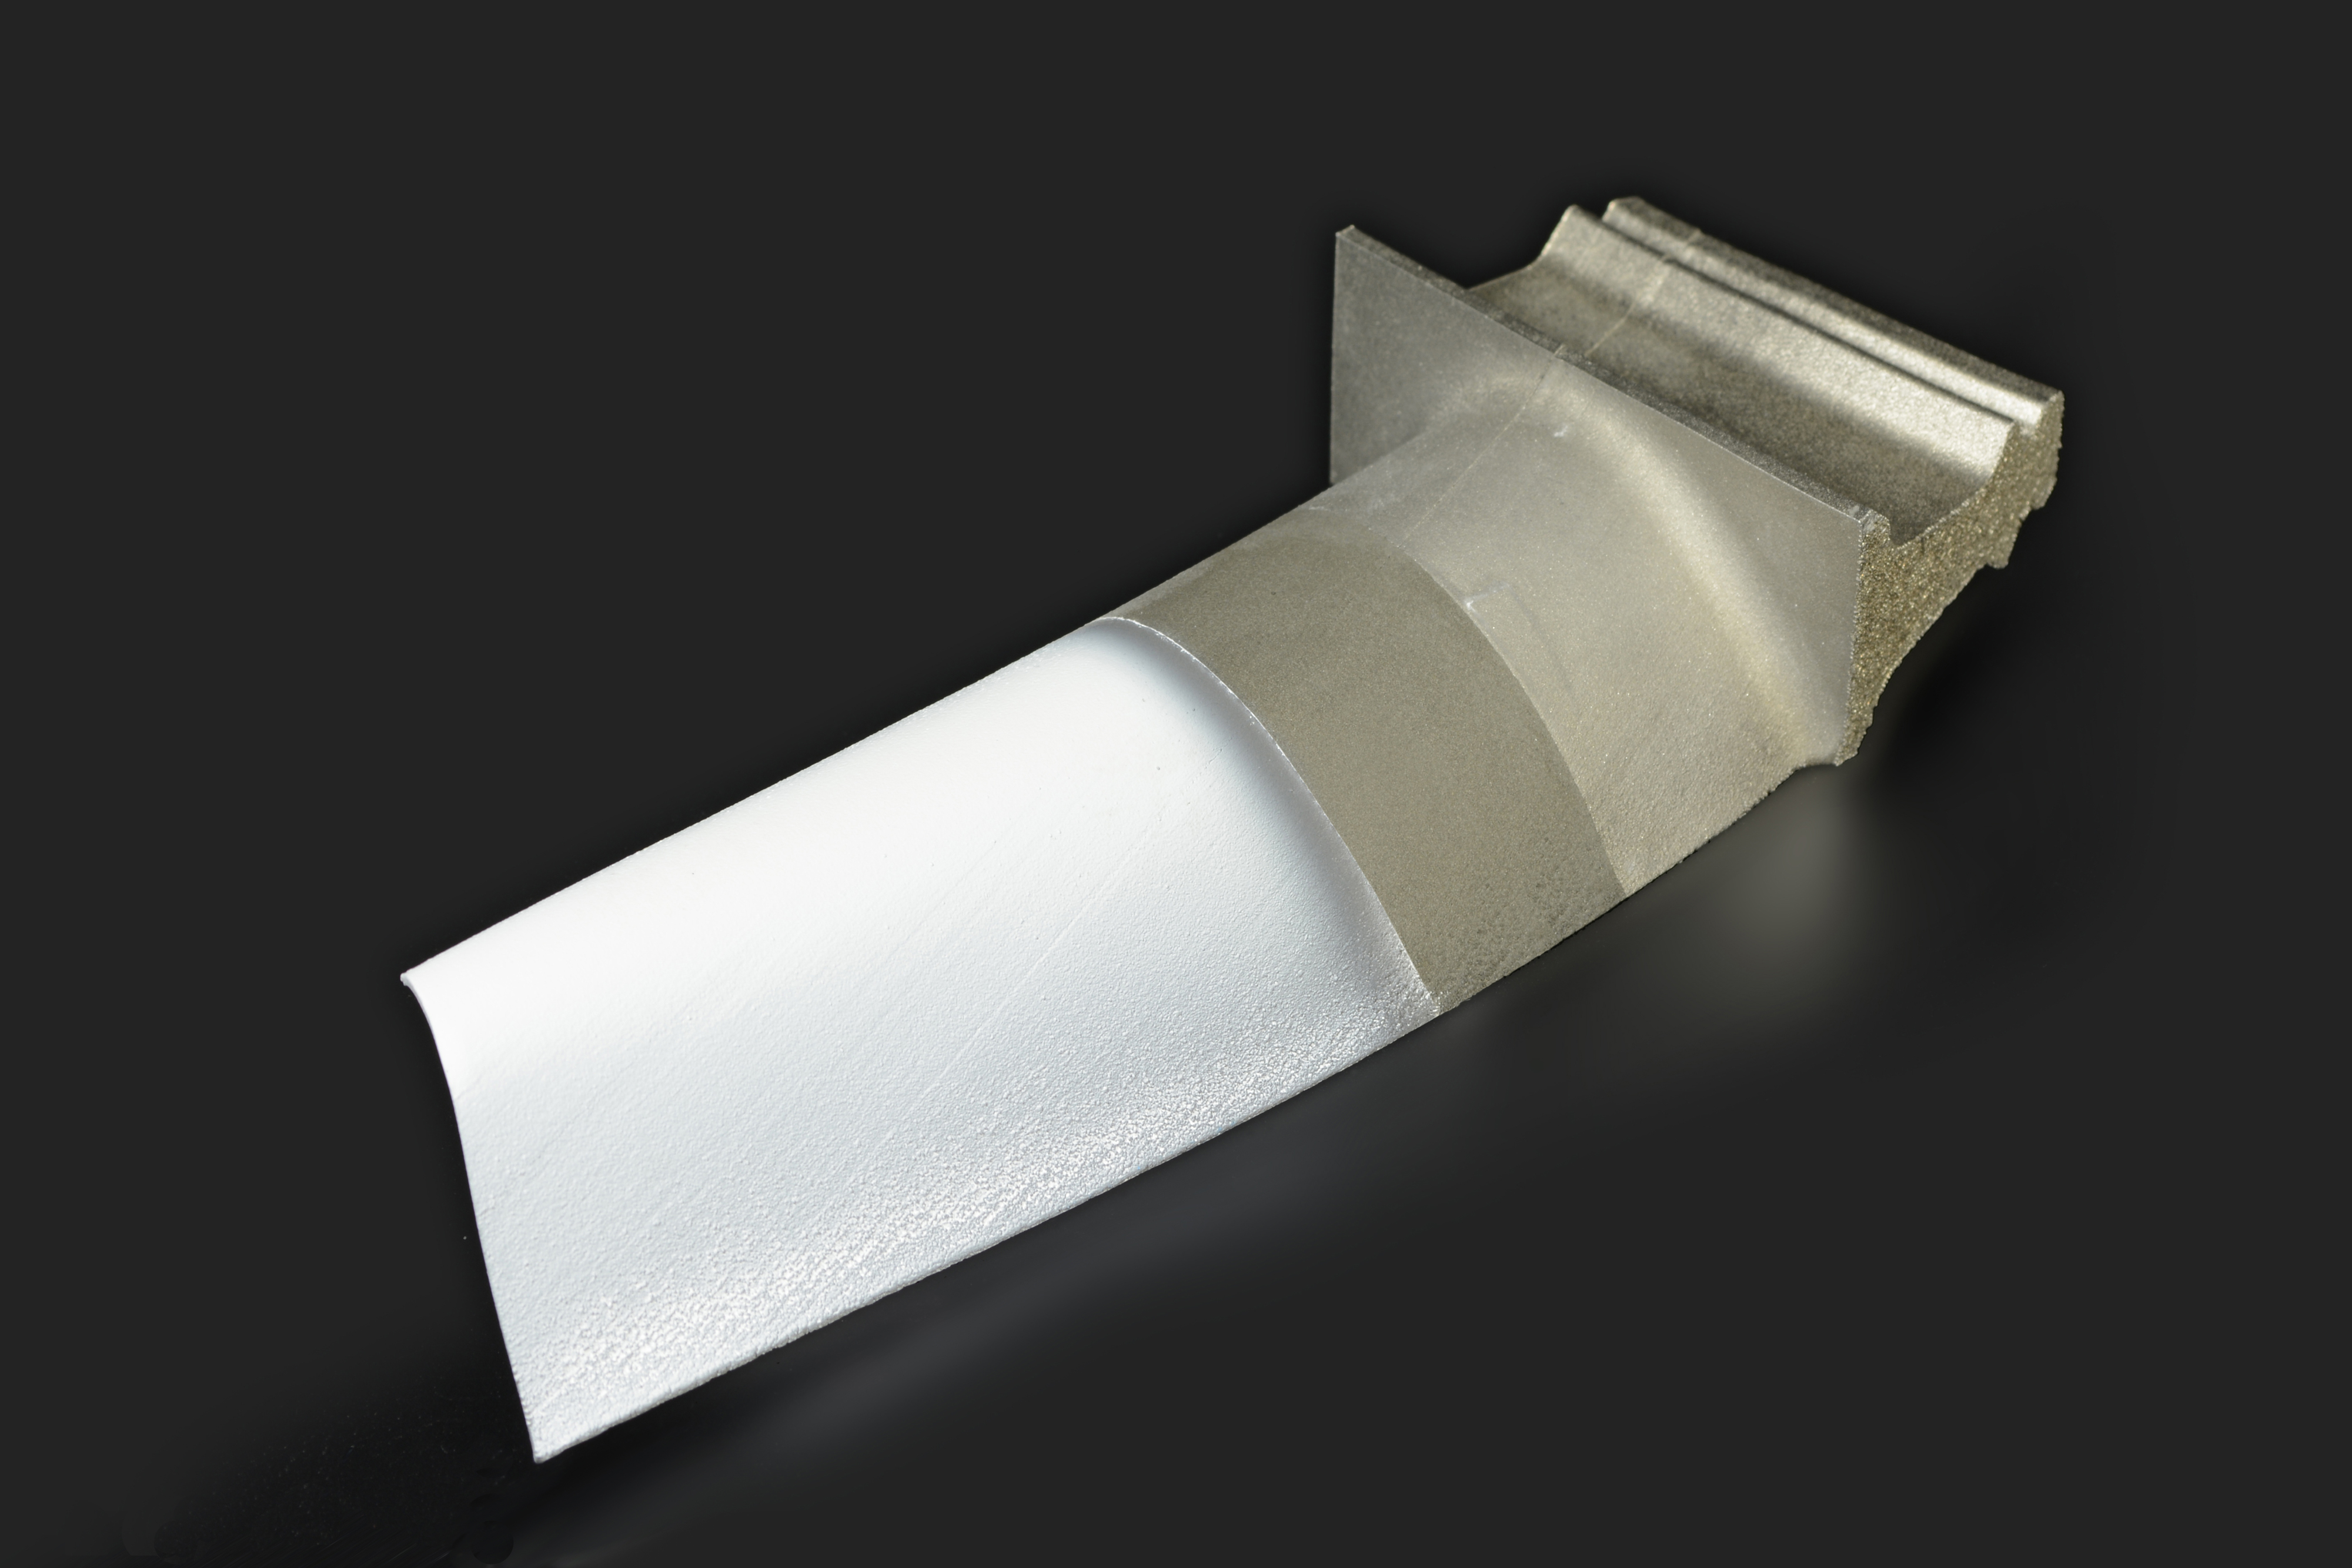 Turbine blade with a thin ceramic coating of yttrium-stabilized zirconium oxide (YSZ): such a thermal barrier coating allows a higher operating temperature in the turbine, which improves the fuel yield.